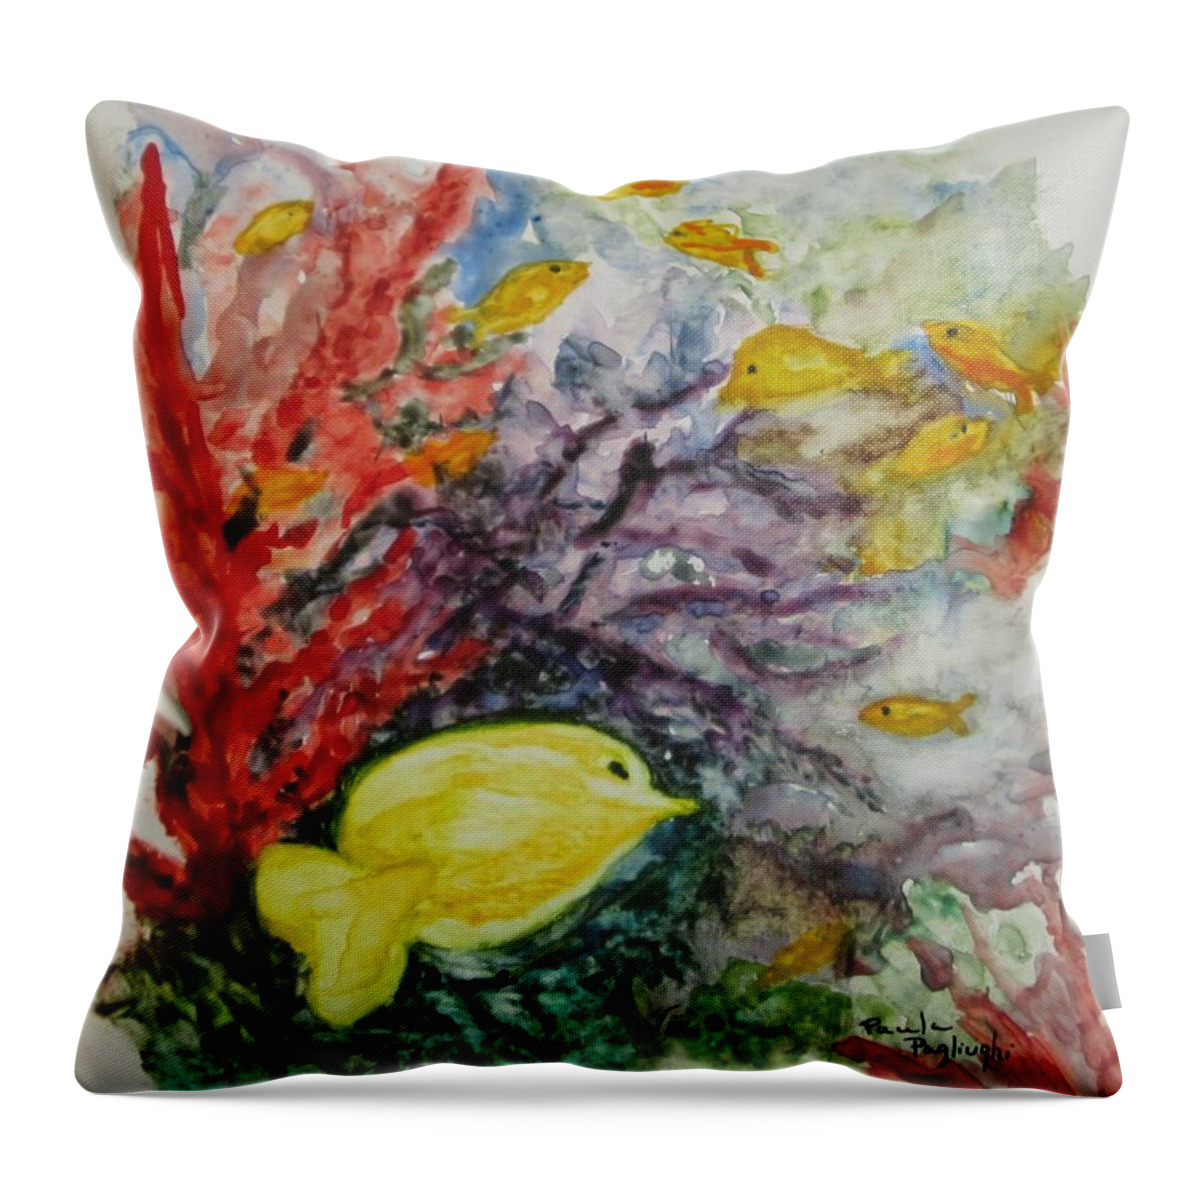 Watercolor Throw Pillow featuring the painting My World by Paula Pagliughi